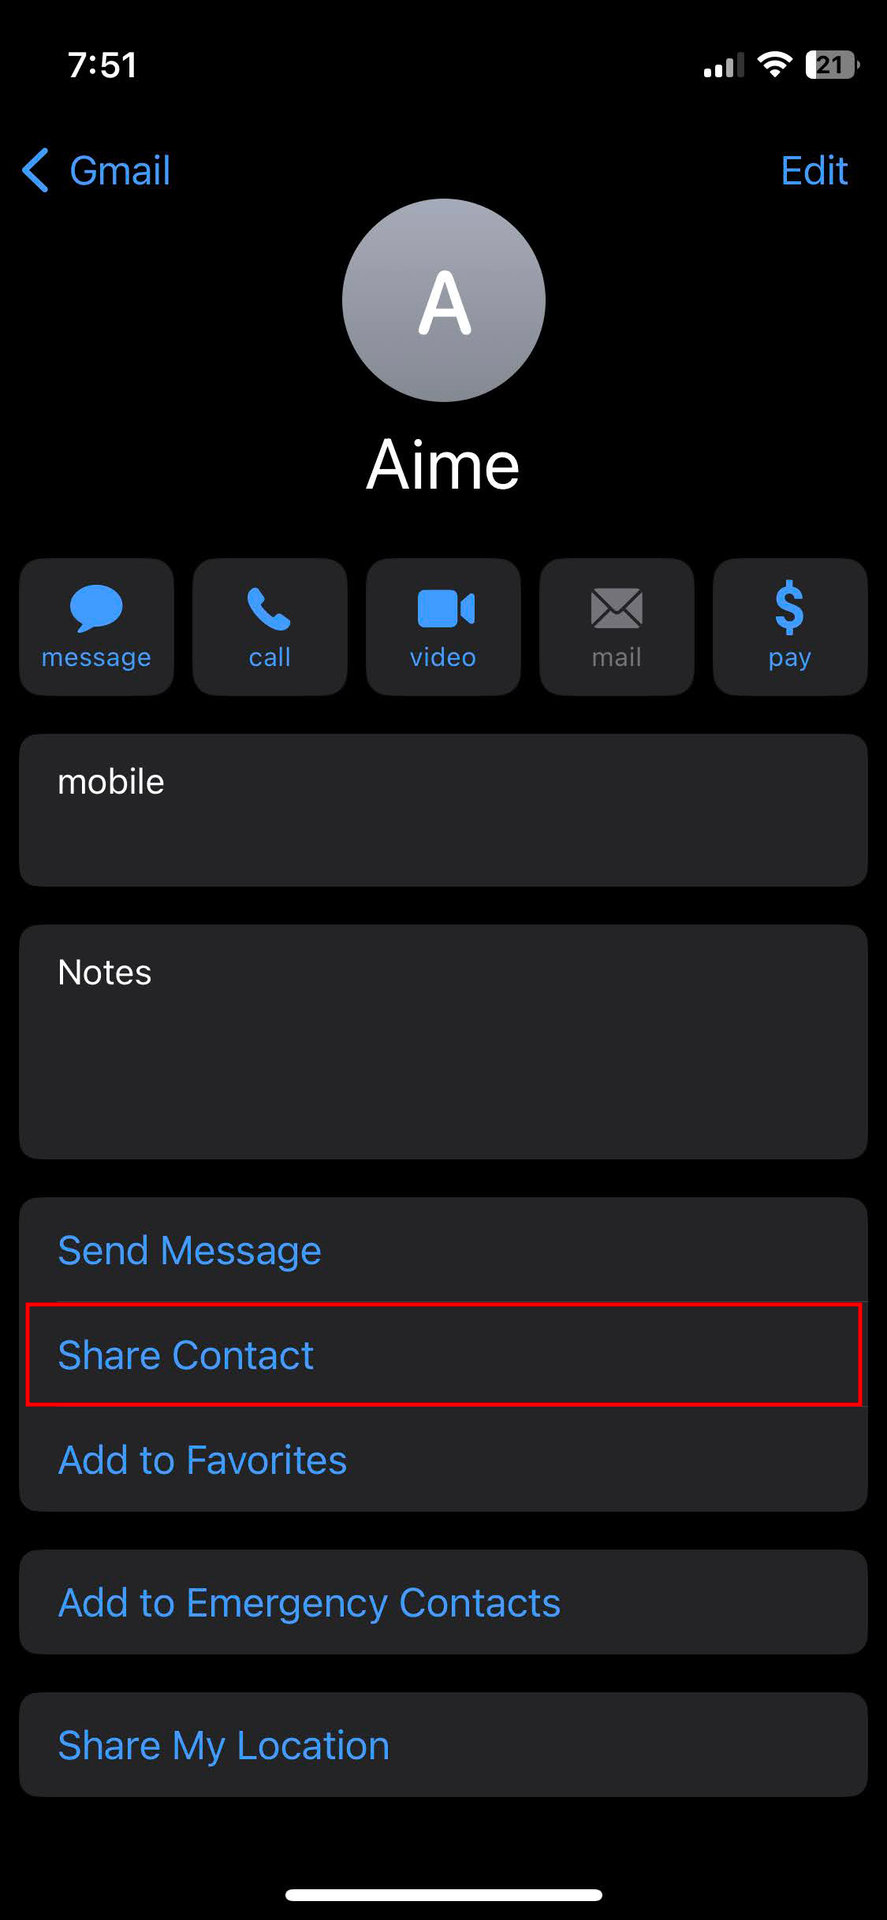 How to transfer contacts from iPhone to Android using a .vcf file 2